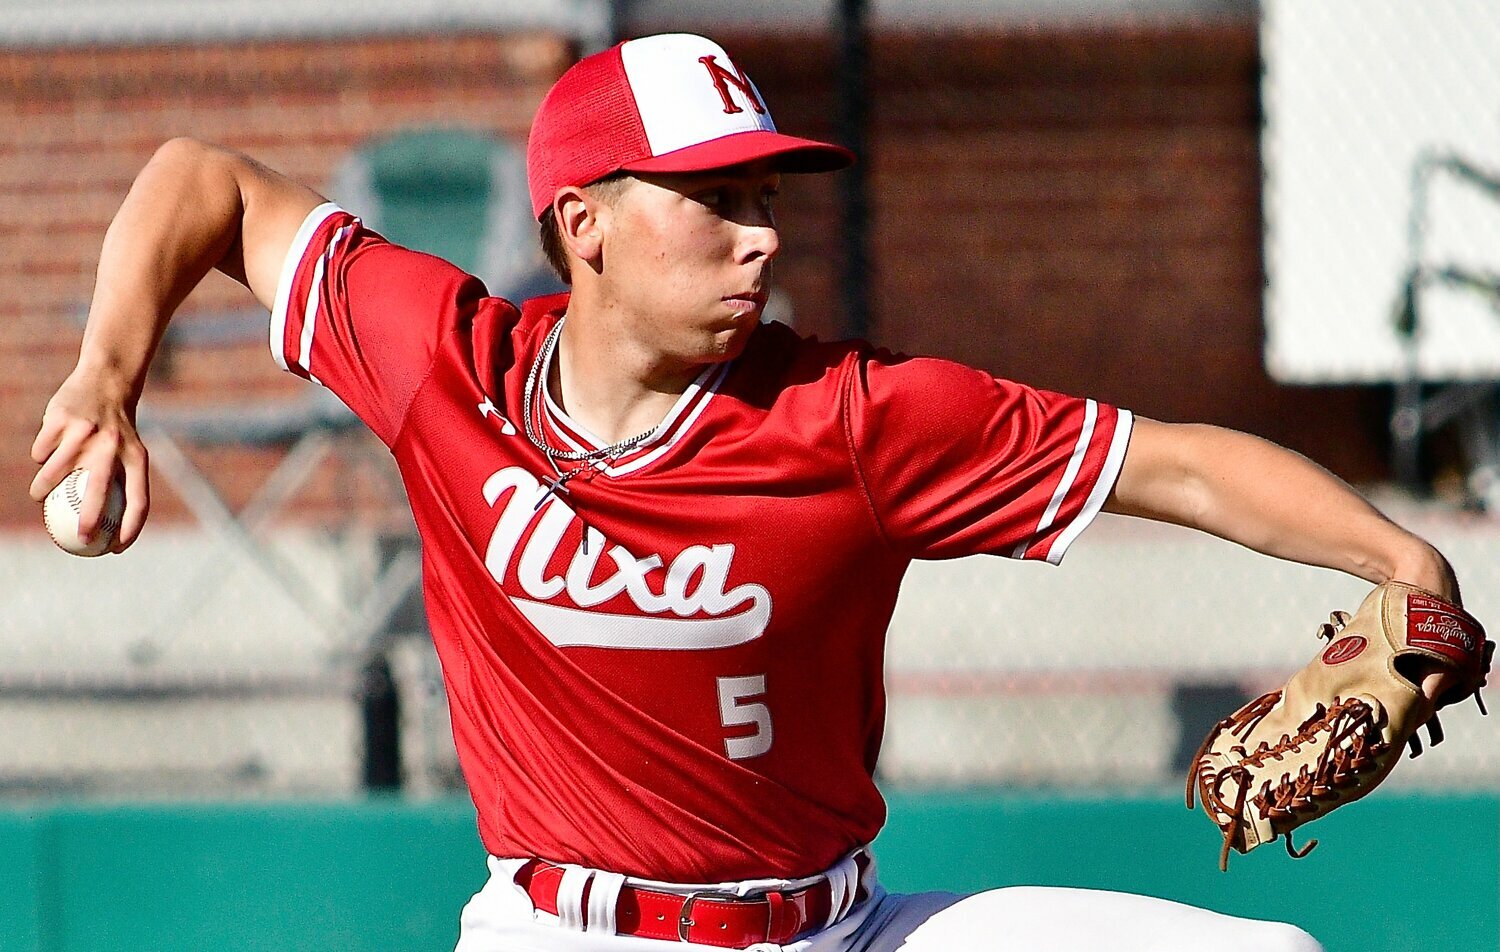 NIXA'S COLIN KELLEY was 6-1 with a 0.76 ERA as a junior this year.